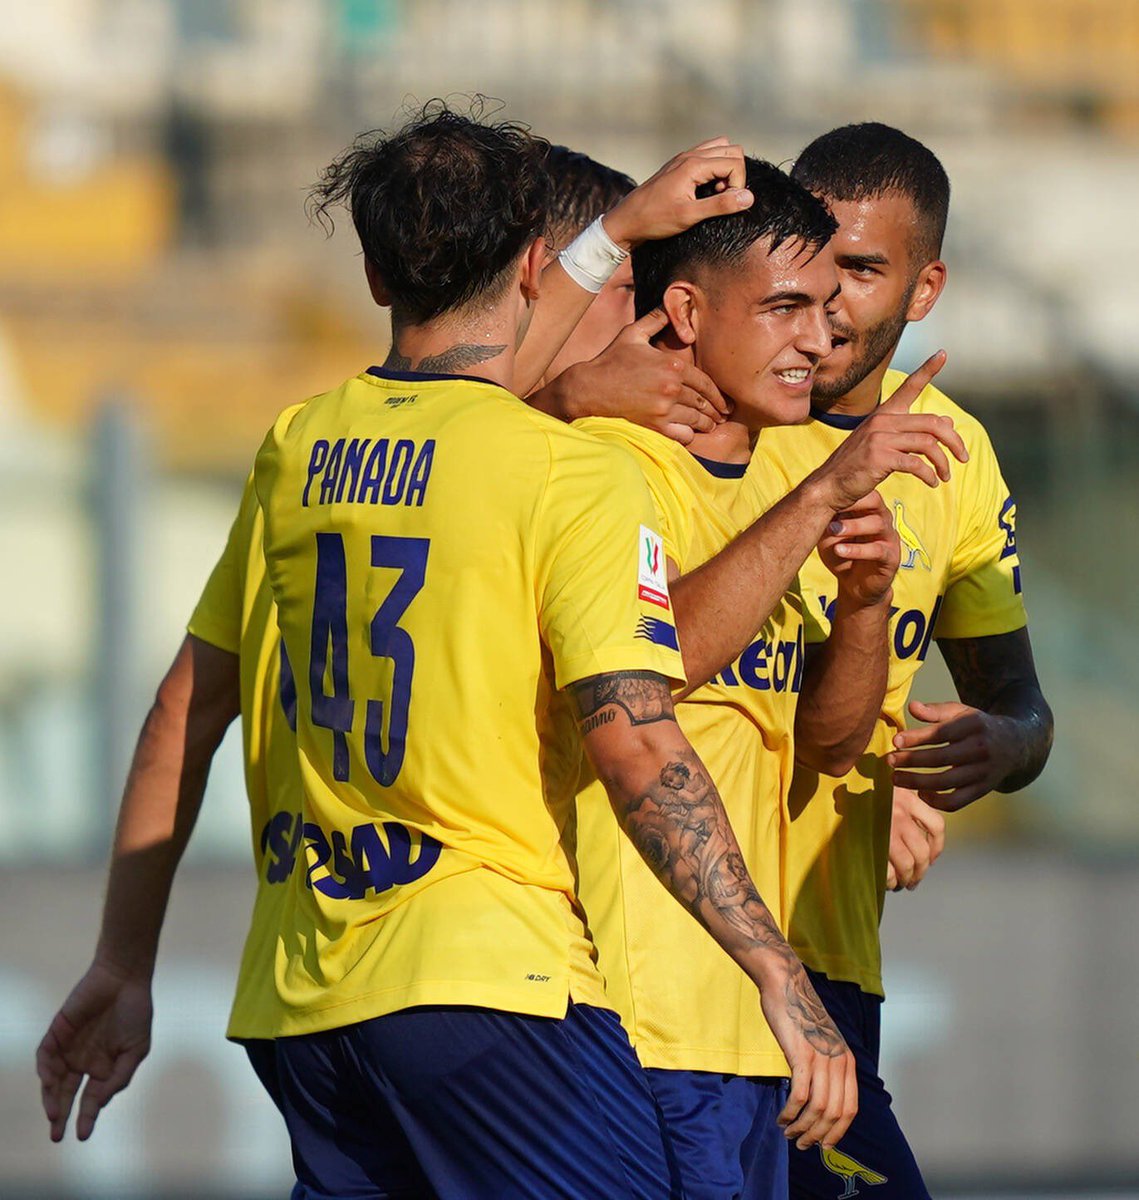 Modena 3-2 Sassuolo, Goals and Highlights: 1st Knockout Round